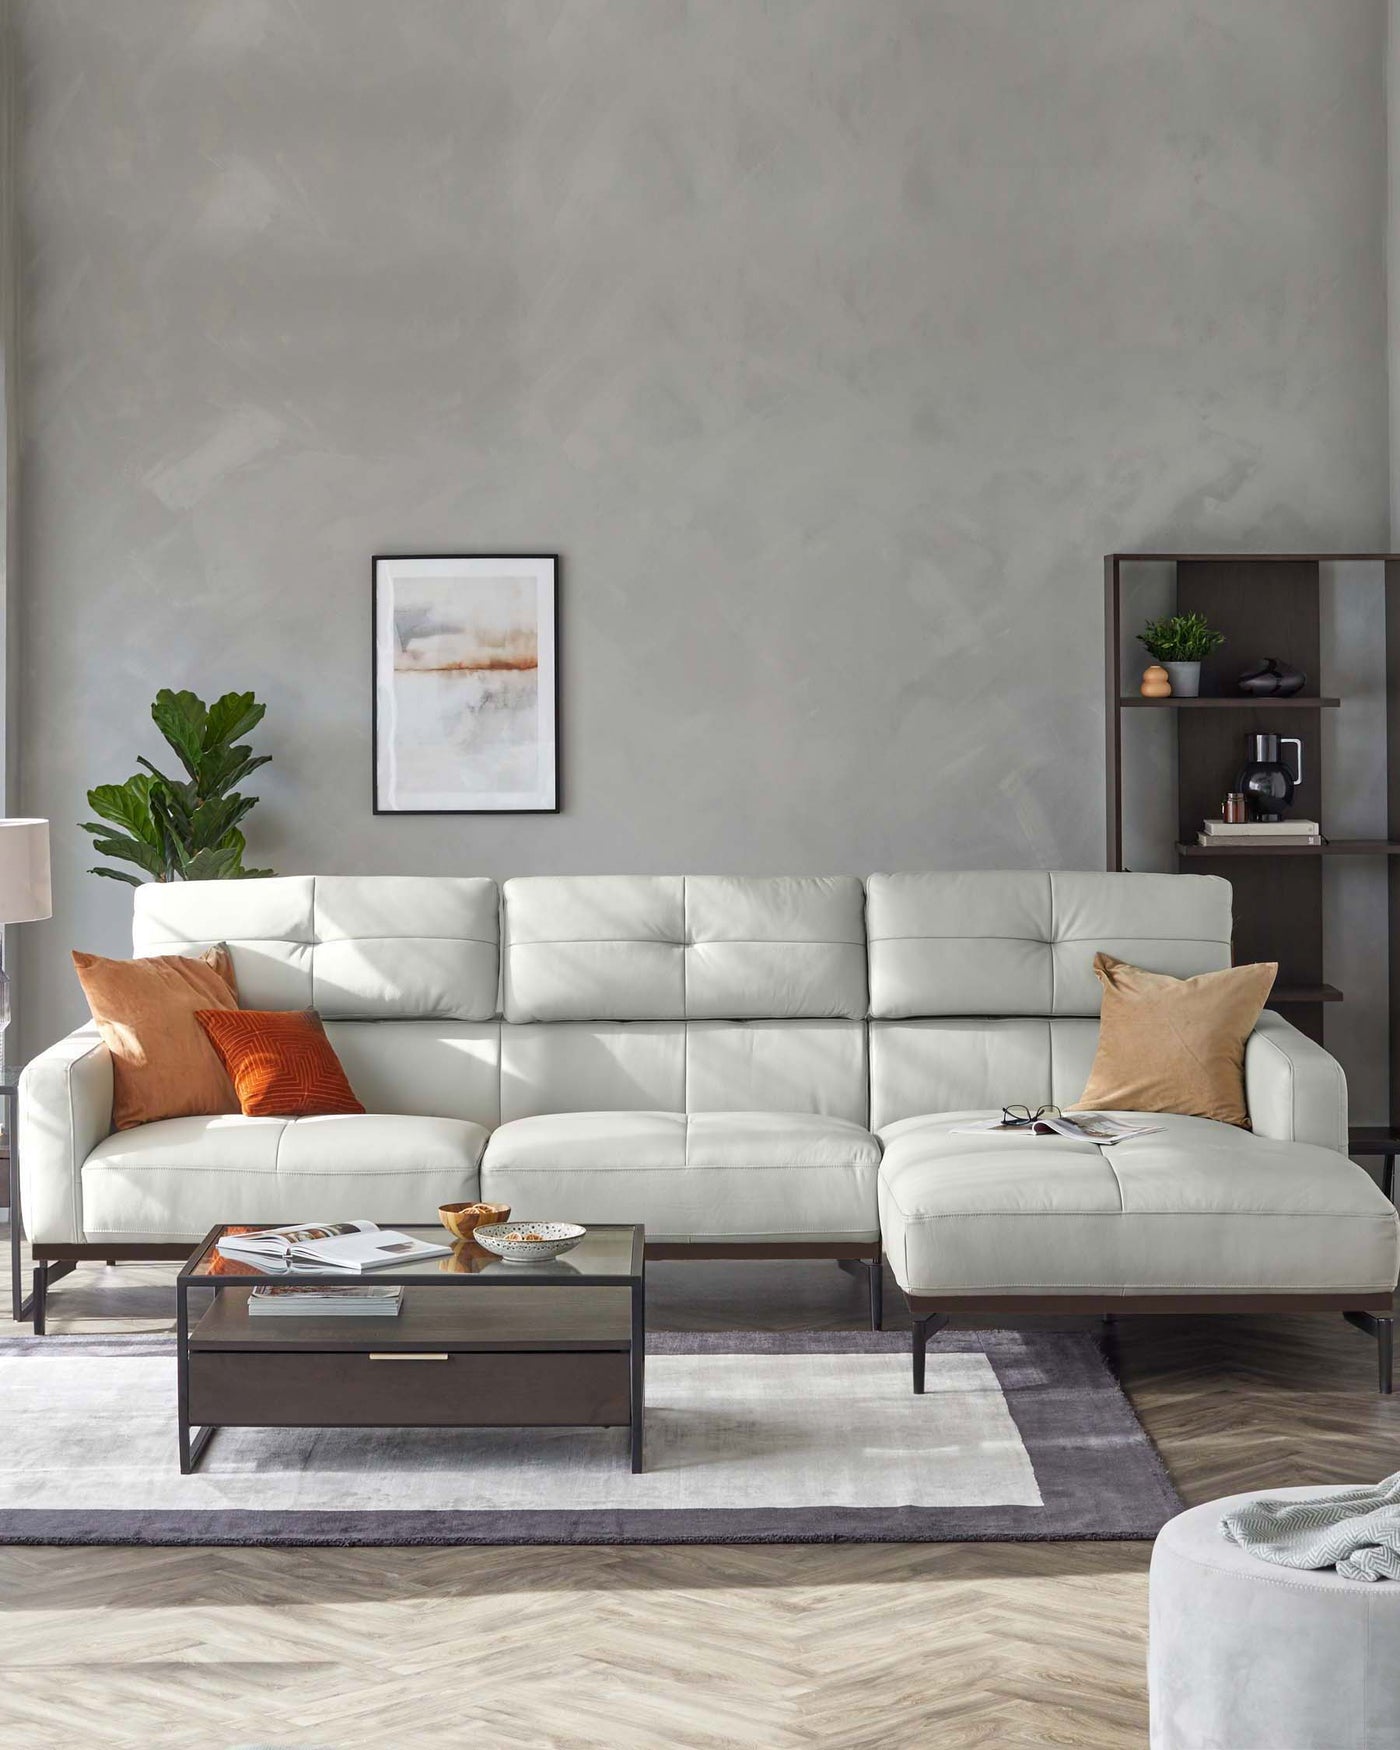 Modern light grey sectional sofa with a chaise lounge, accentuated with orange and tan throw pillows, a rectangular wooden coffee table with a glass top and a single drawer, set on a grey and white area rug. To the right, a dark wooden shelving unit displays decorative items and books, complemented by a white standing lamp and a green potted plant to the left.